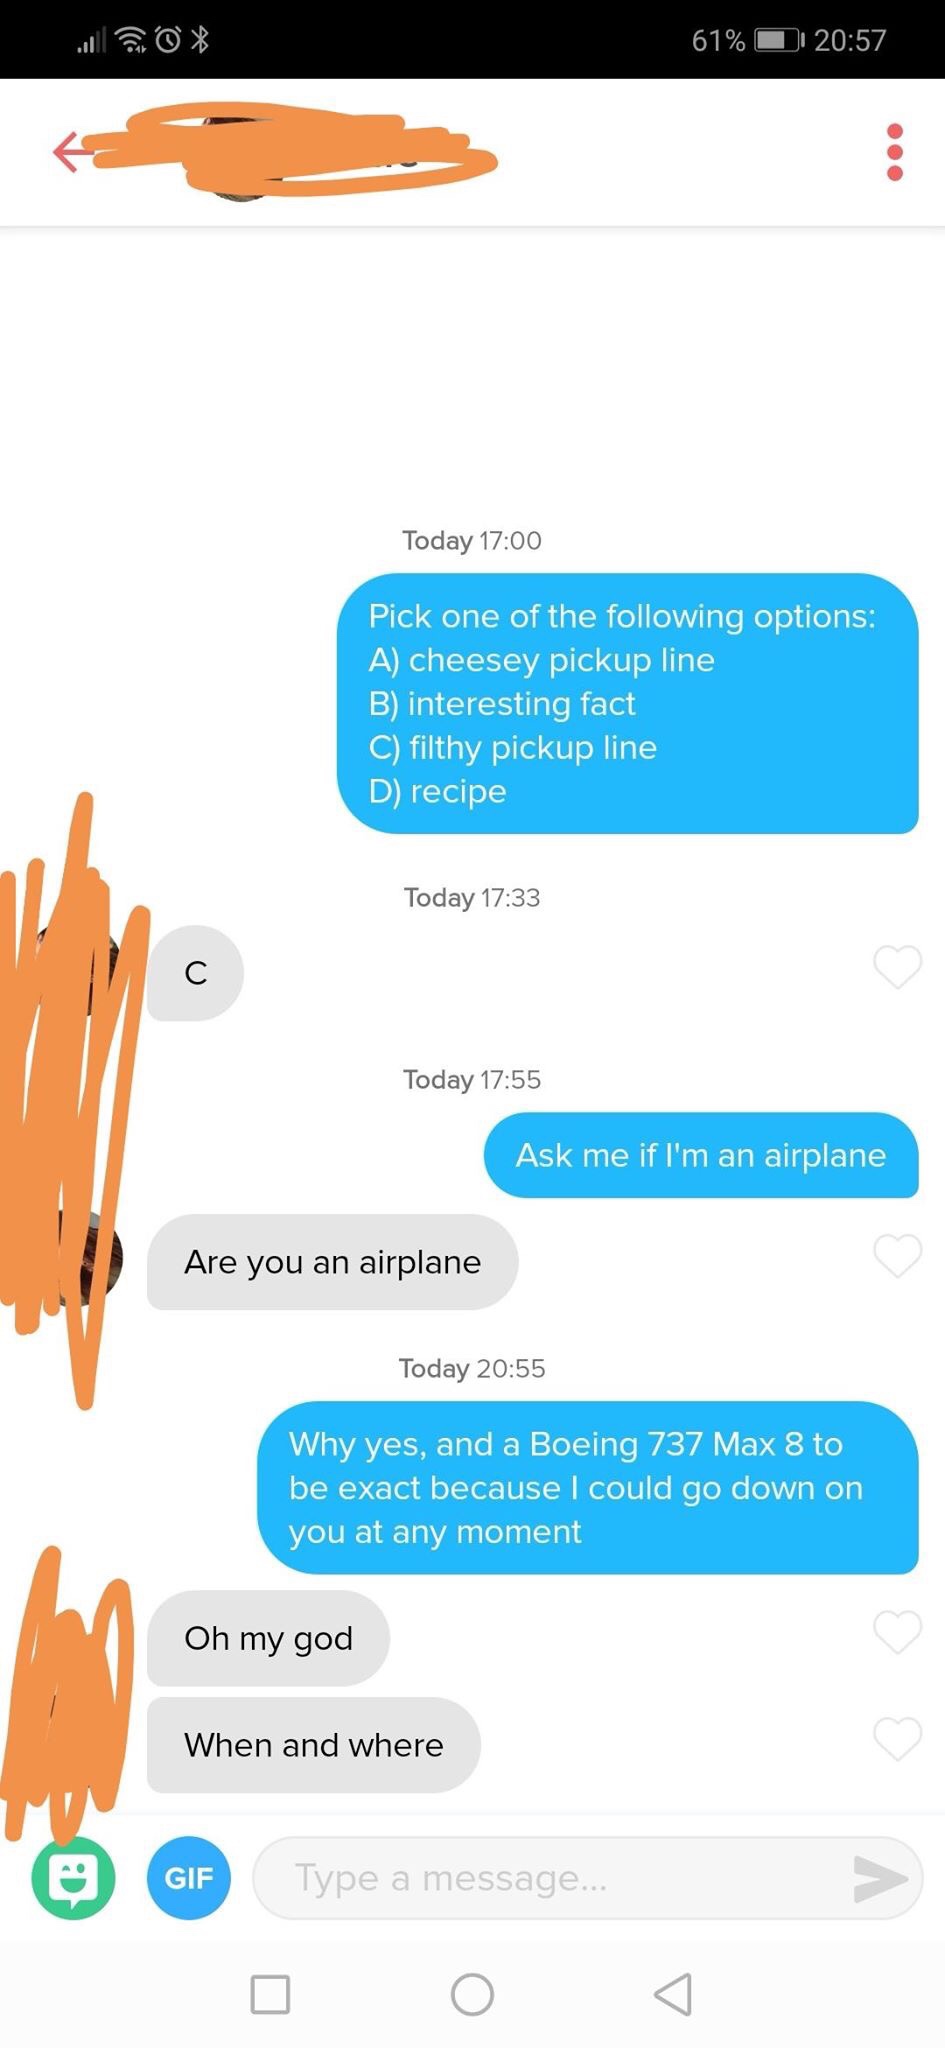 Tinder pickup lines - ask me if i m an airplane pick up line - Today Pick one of the ing options A cheesey pickup line B interesting fact C filthy pickup line D recipe Today Today Ask me if I'm an airplane Are you an airplane Today Why yes, and a Boeing 7